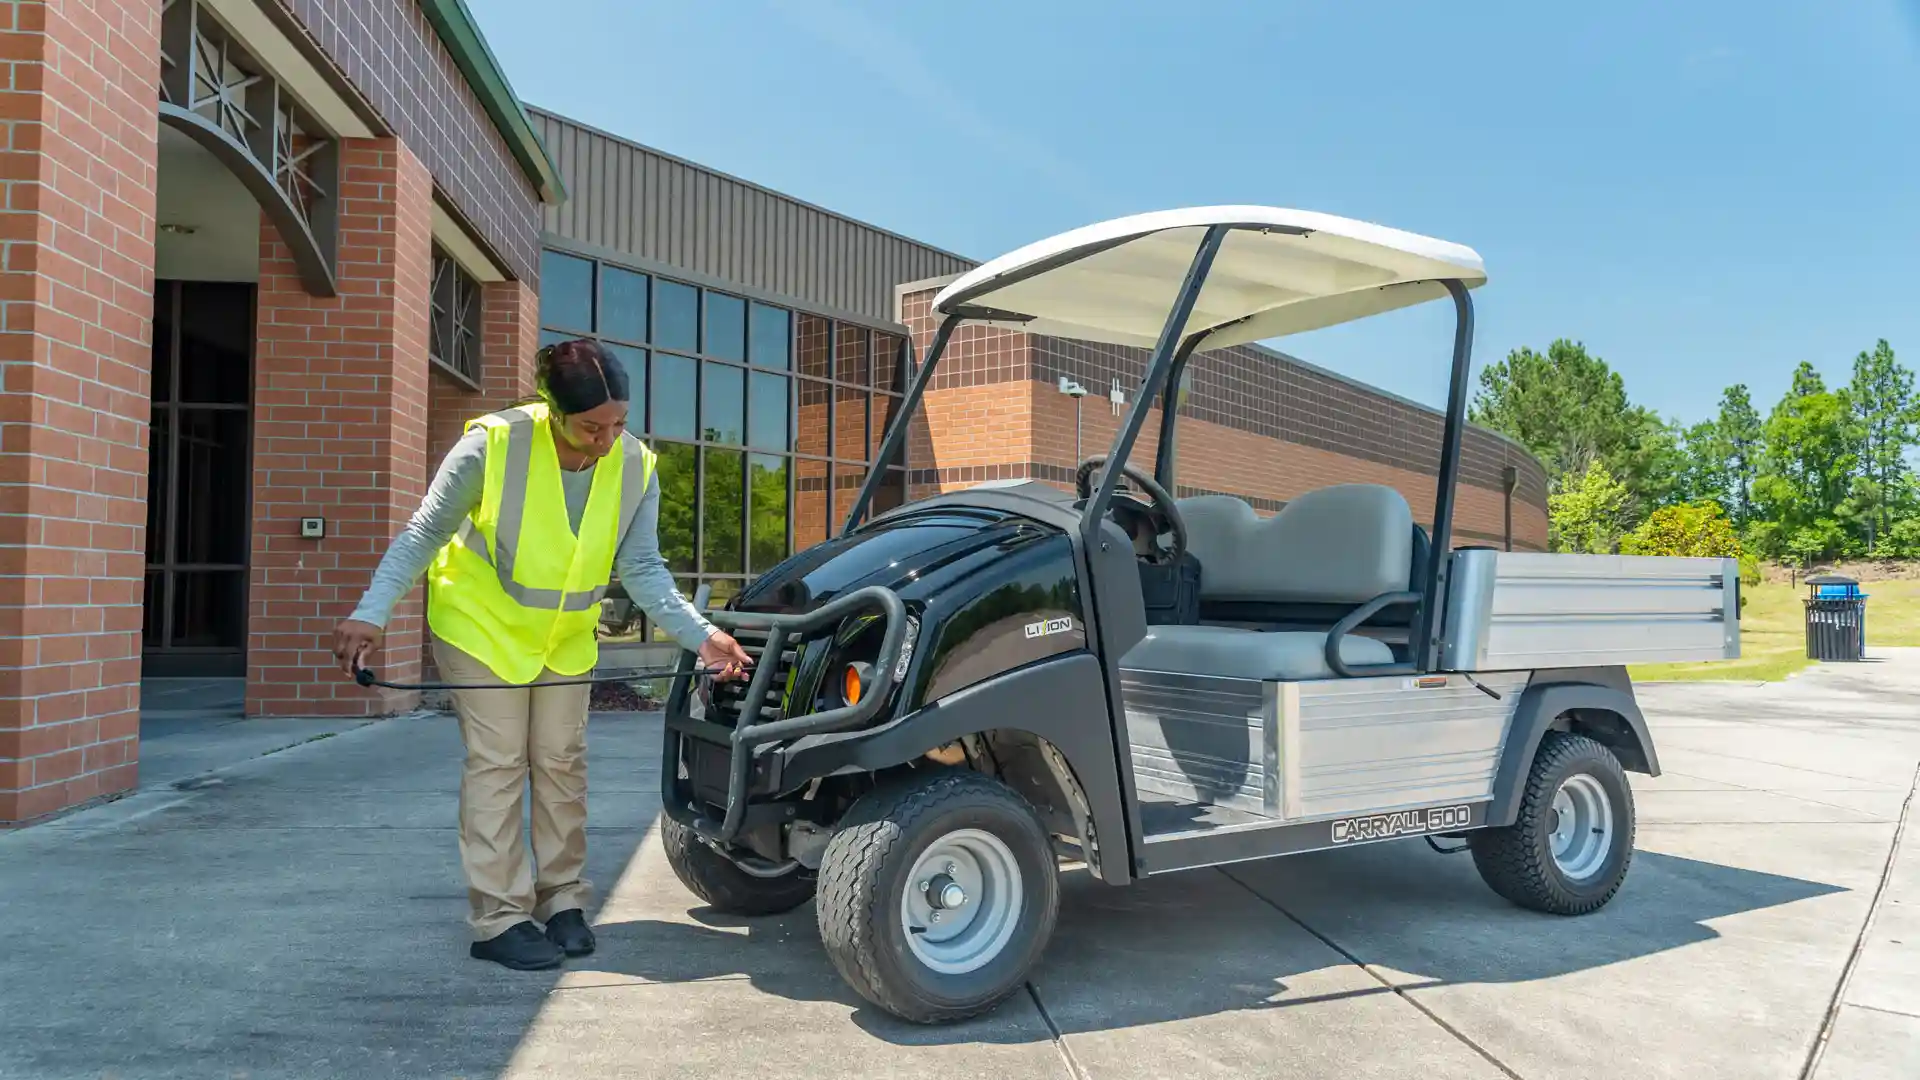 Carryall 500 gas or electric utility vehicle at university campus